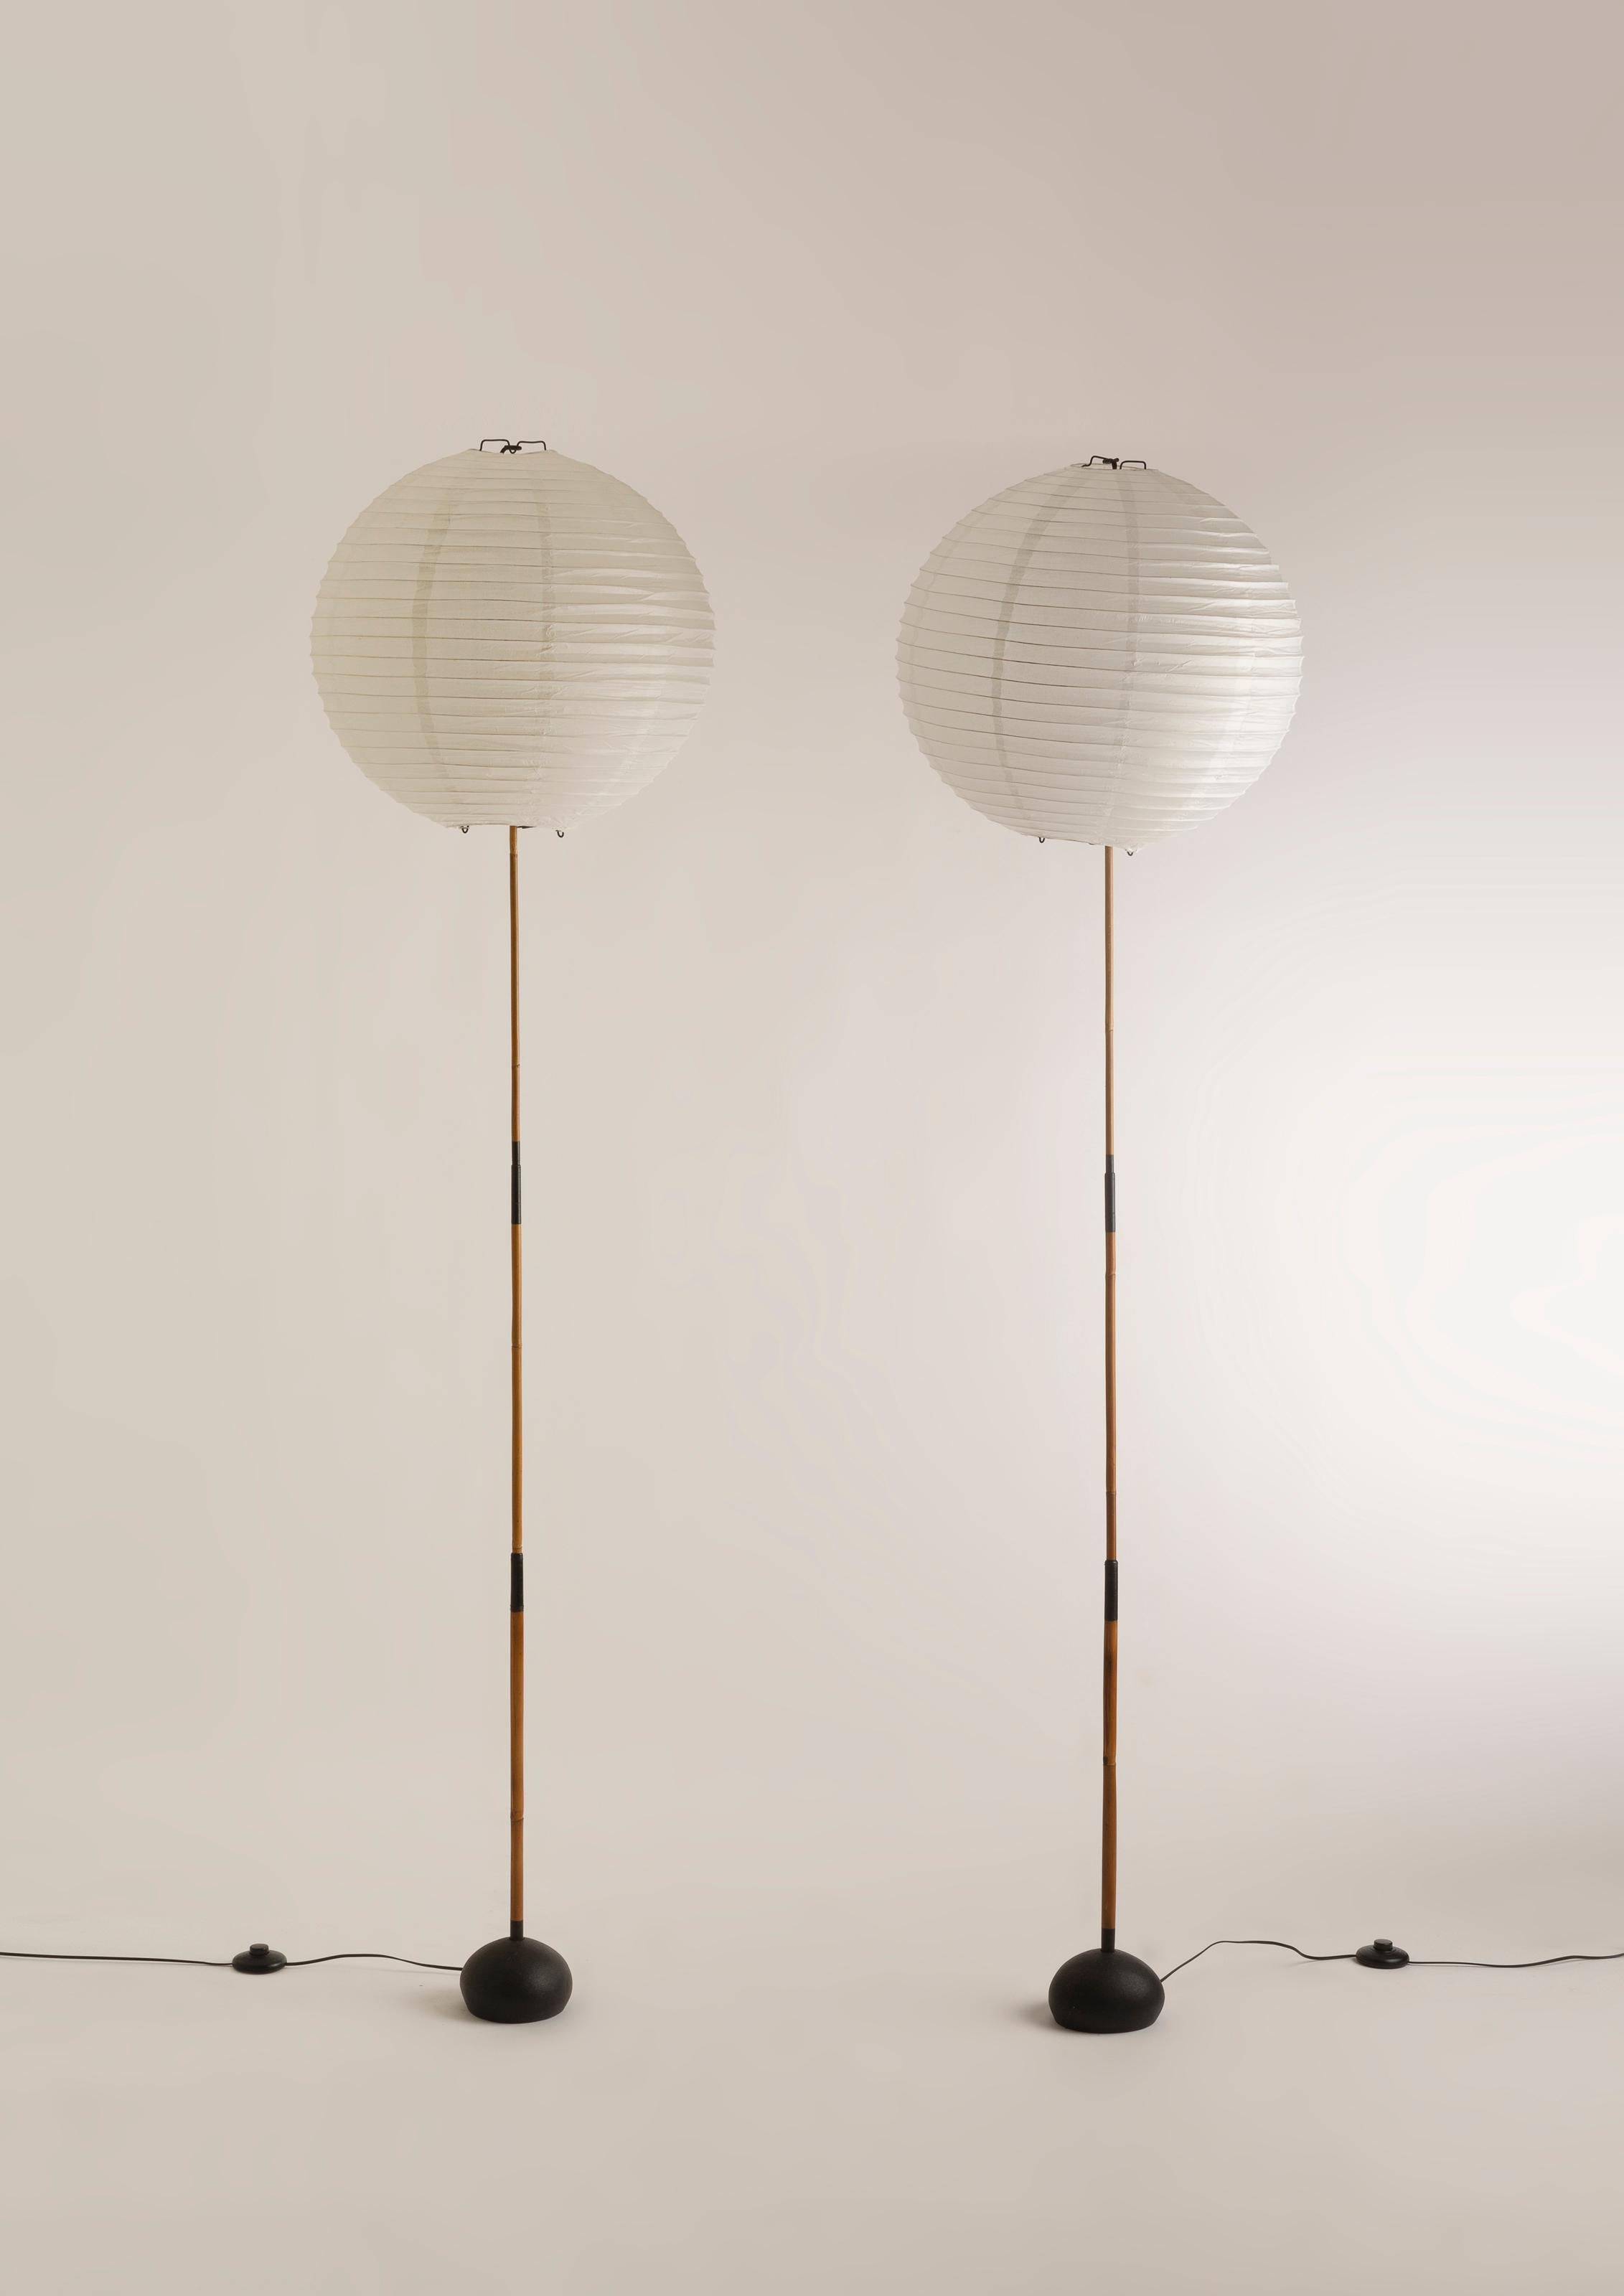 A pair of floor lamps in the style of the famous Akari by Isamu Noguchi : the listed price is for the pair, possible to sell separated (5 750 € for each piece)
With shades in paper & bamboo, and base in cast iron & bamboo.
Italian edition in taste